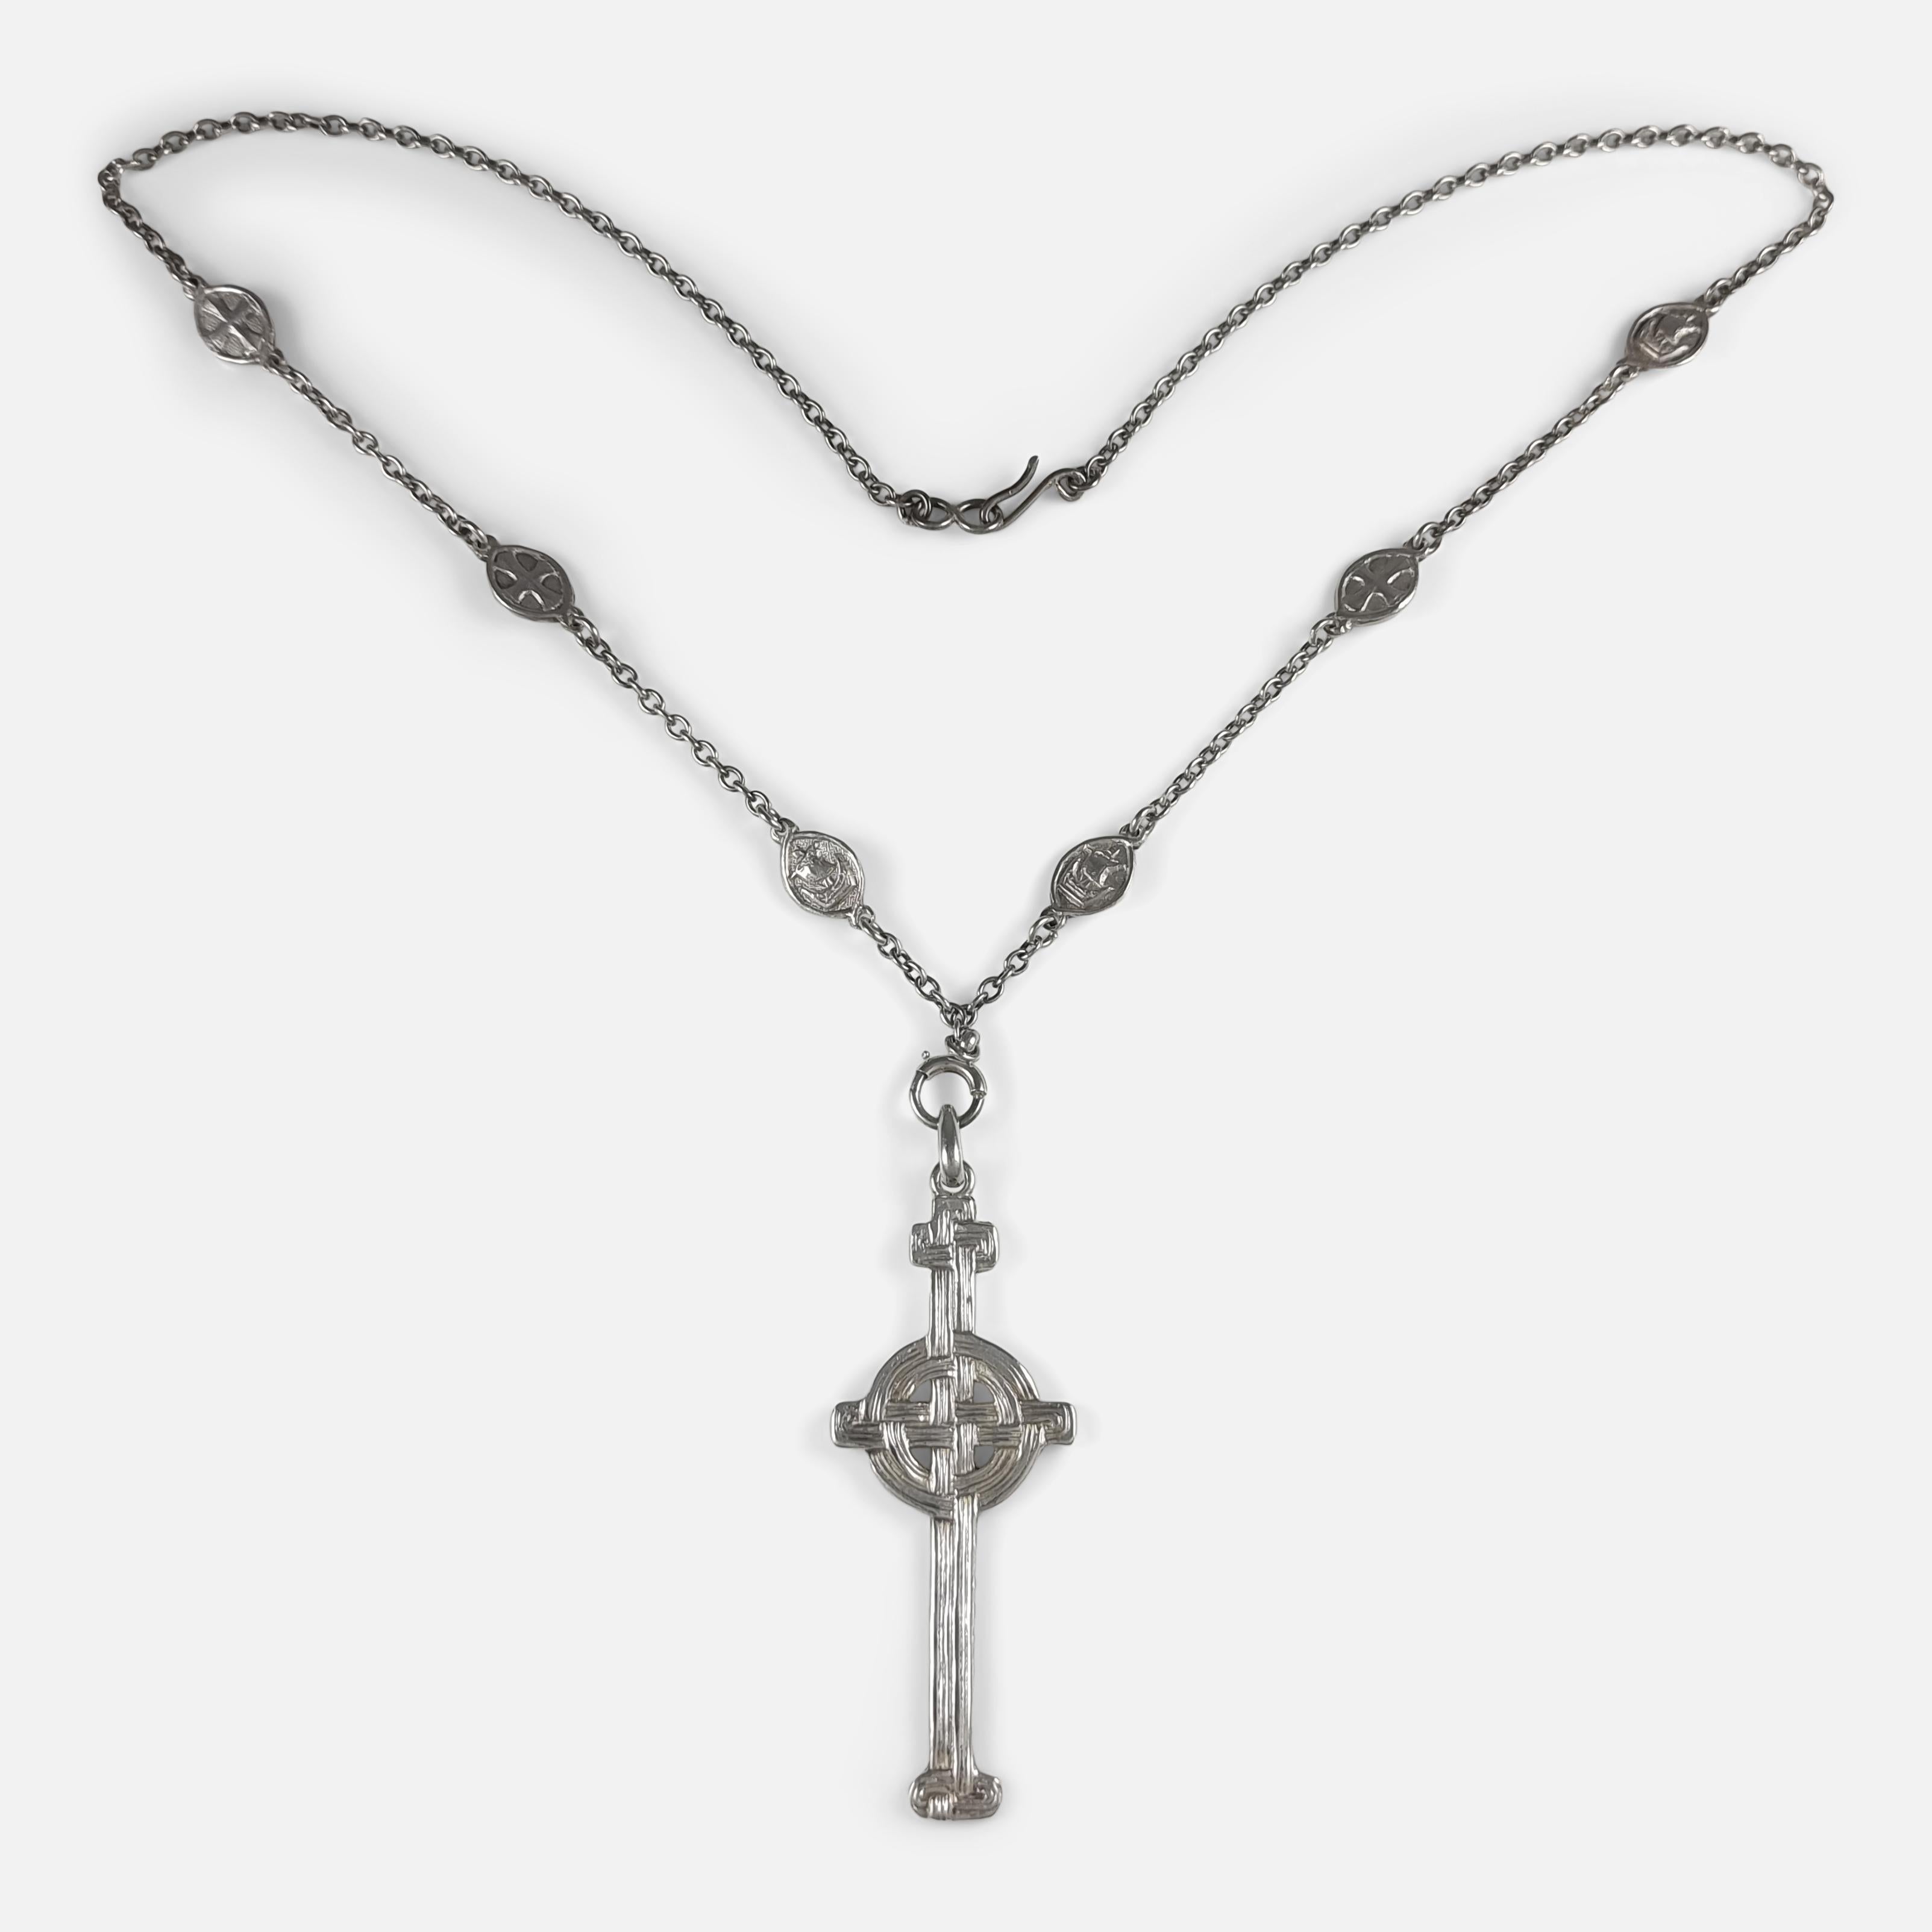 A Scottish Celtic revival Iona silver cross pendant by Alexander Ritchie, suspended on an unmarked trace link chain featuring Celtic motifs.

It is hallmarked with Glasgow assay marks, date letter 